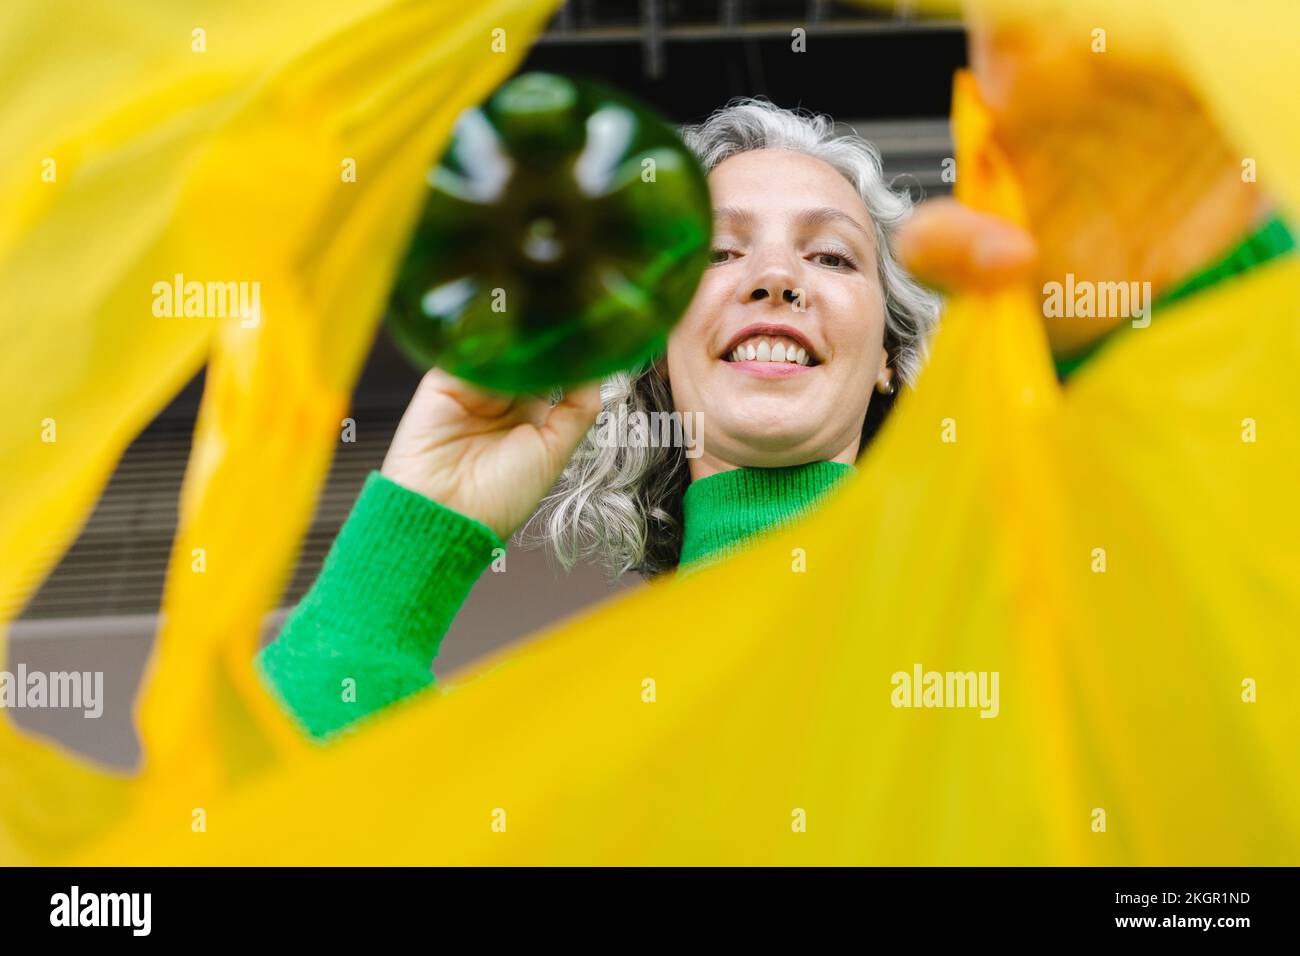 Smiling woman putting green bottle in yellow plastic bag Stock Photo